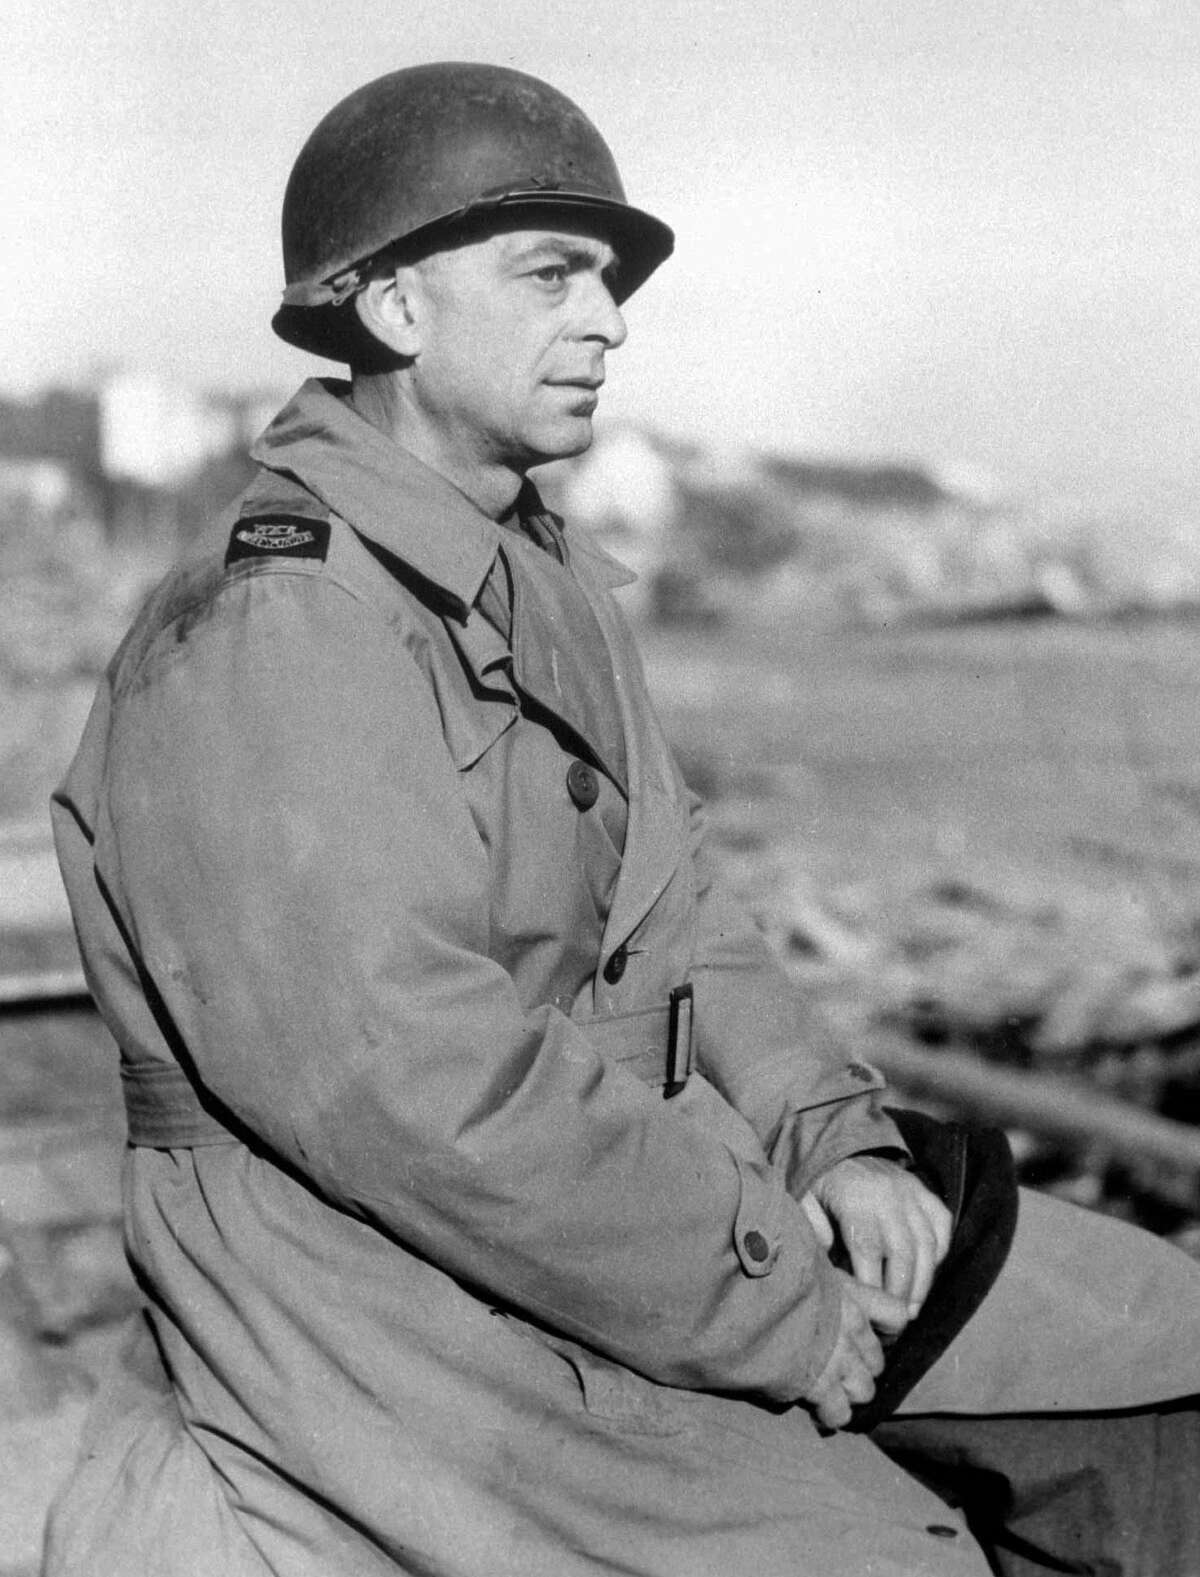 In this March 1, 1944, photo, Ed Kennedy, chief of The Associated Press staff in North Africa, wears a metal helmet at the Anzio beachhead in Italy.